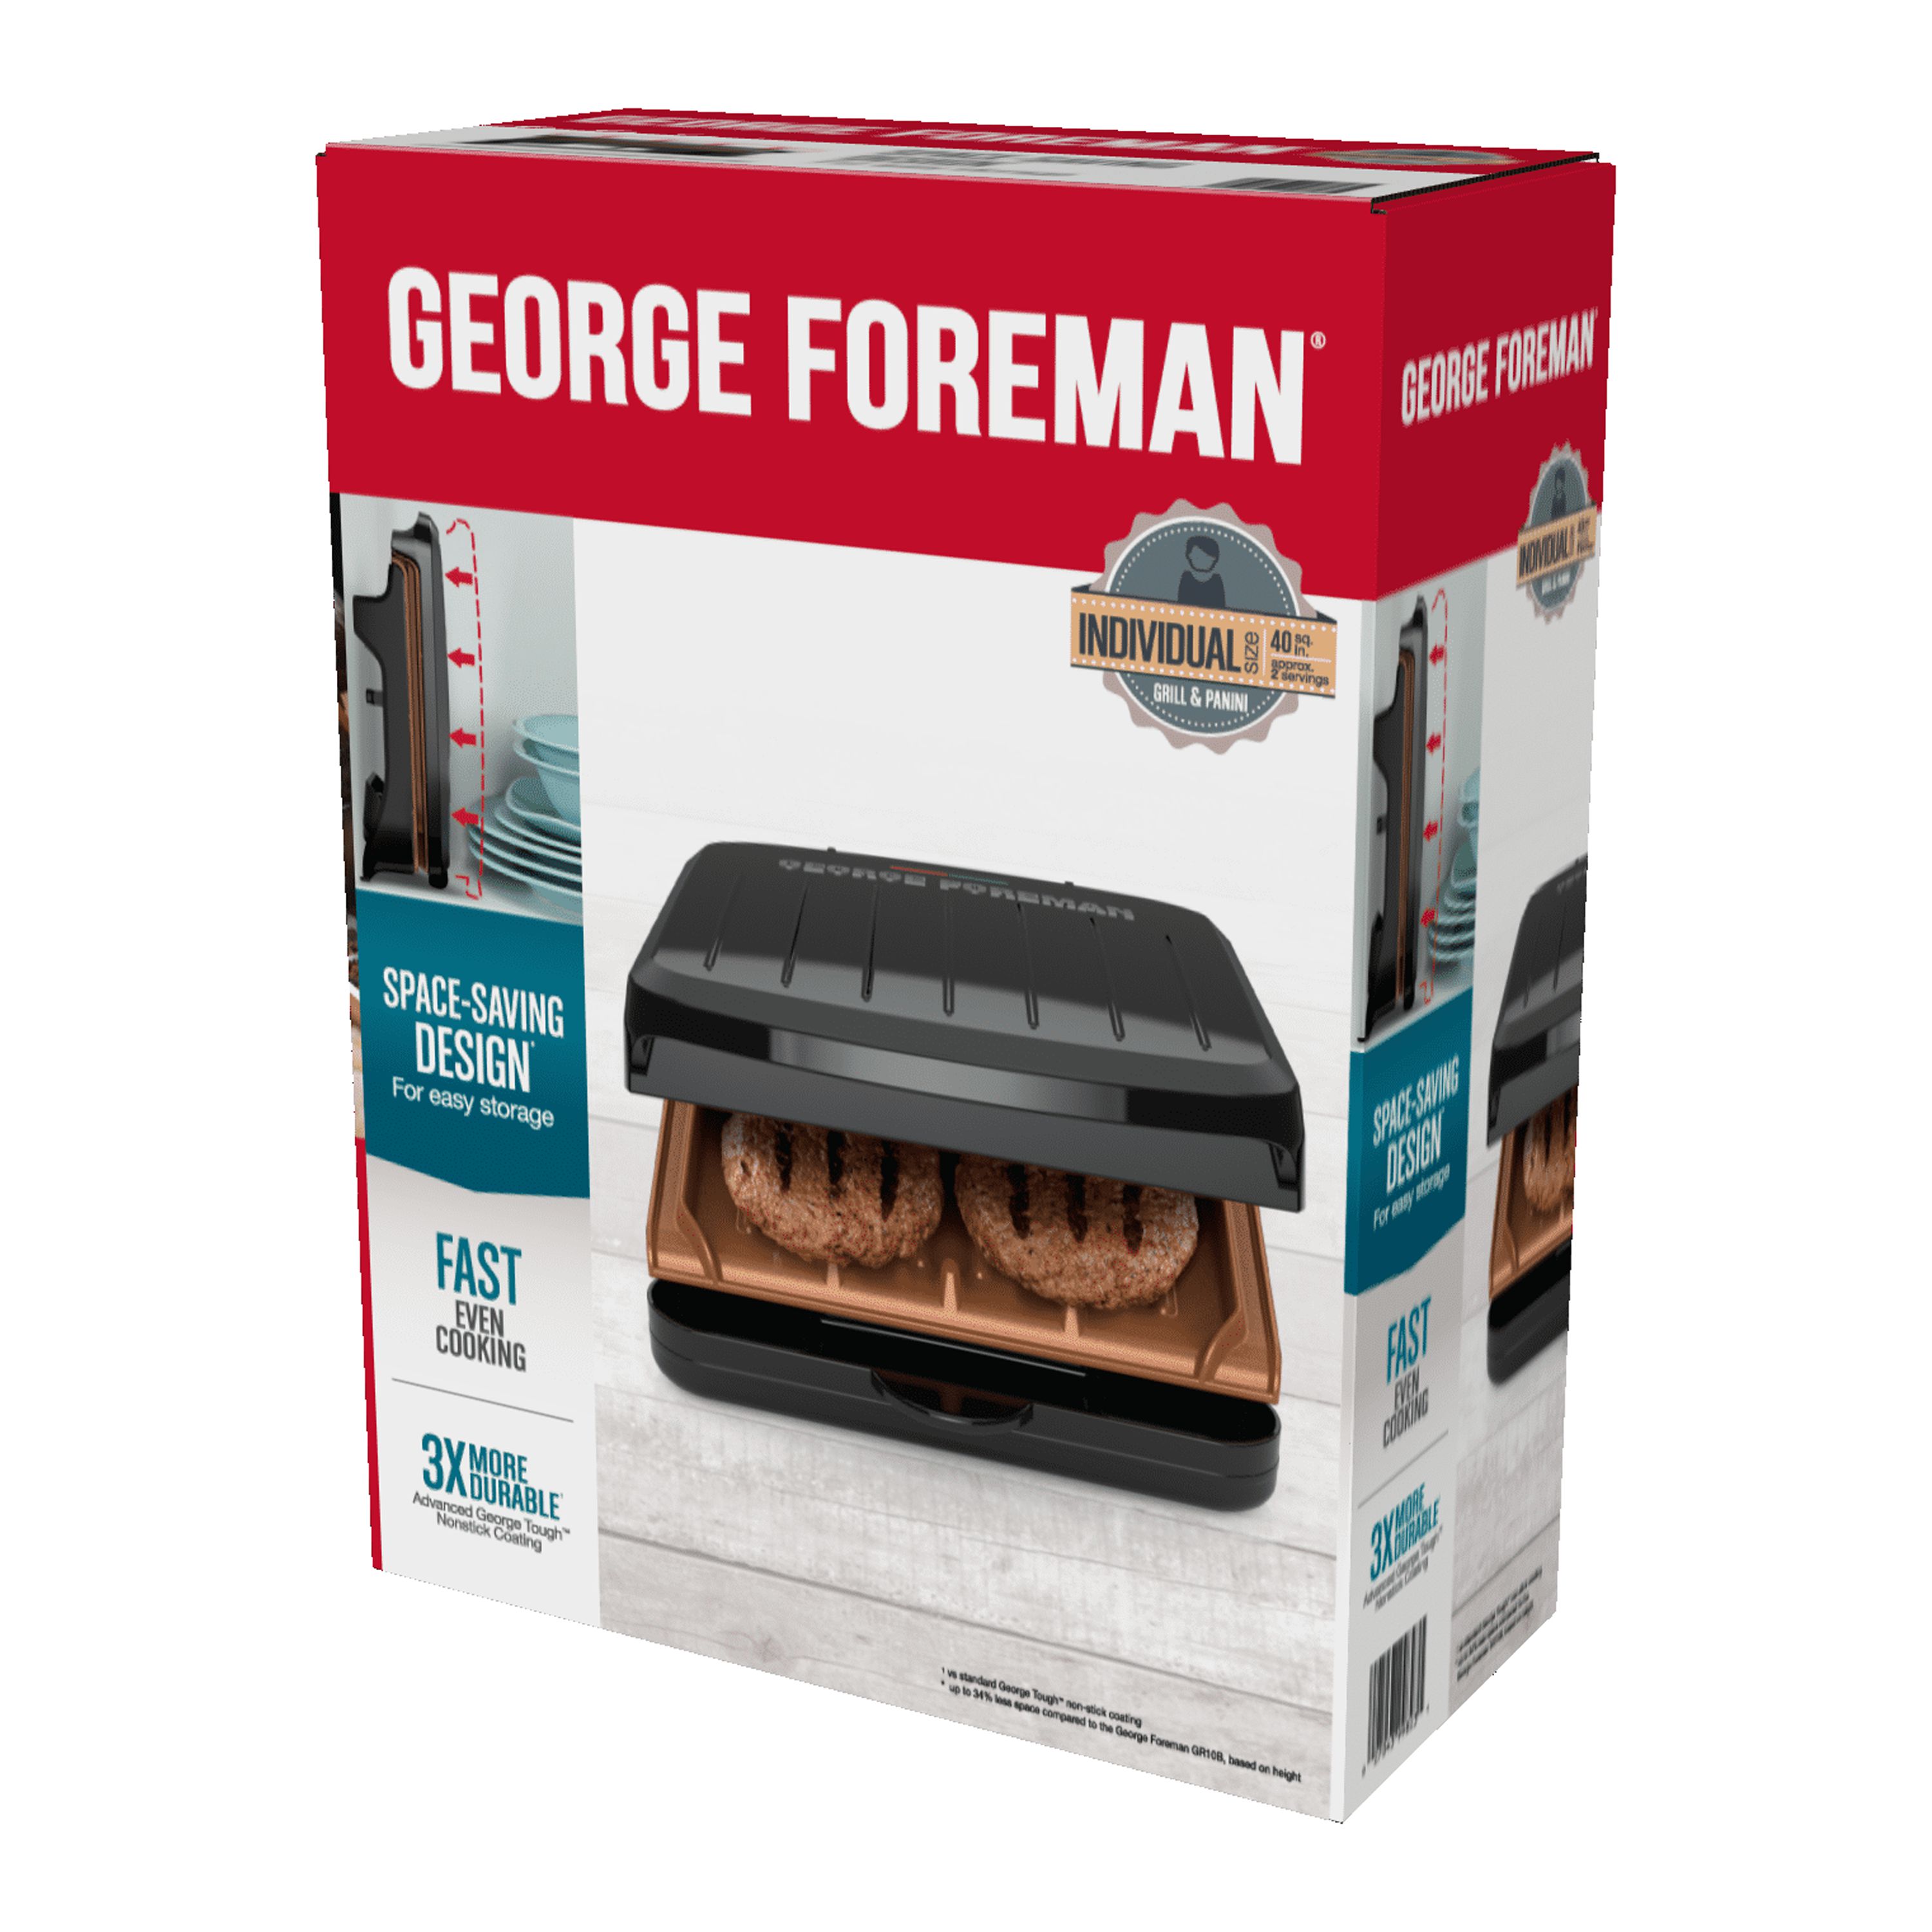 George Foreman Electric Indoor Grill and Panini Press, Black with Copper Plates, Serves 2, Classic Plate, GRS040-Series - image 4 of 9